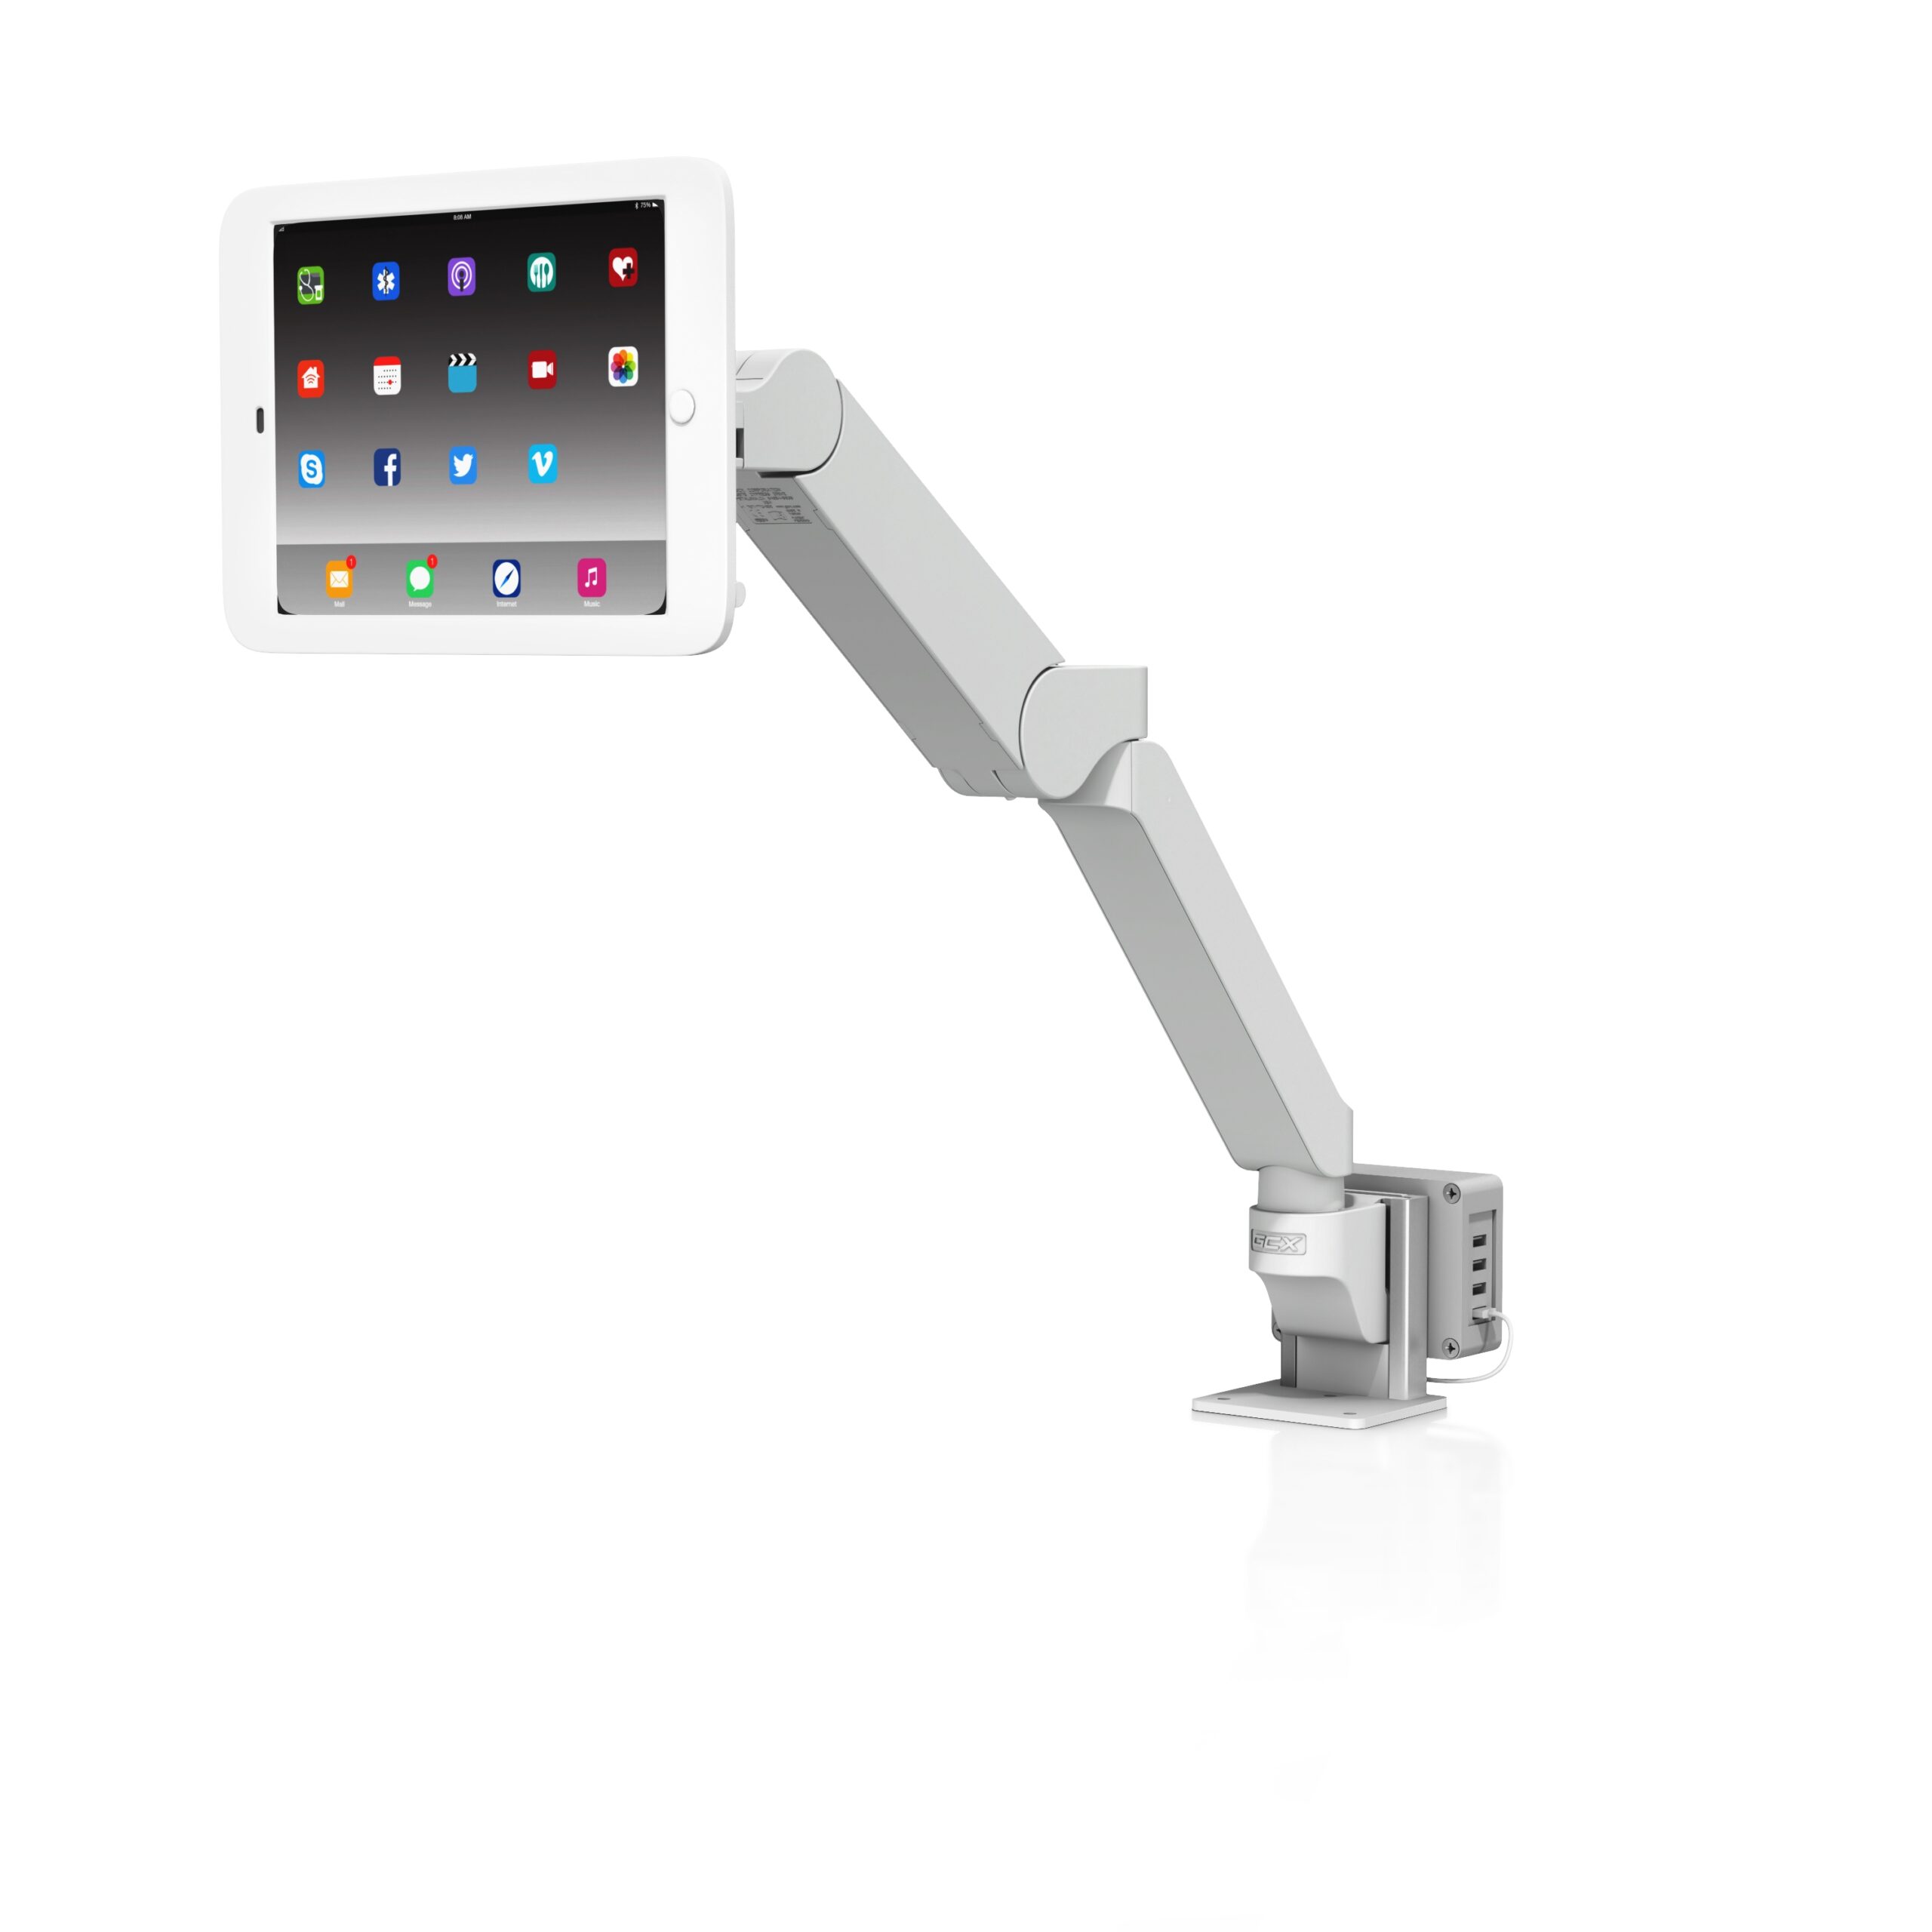 Countertop Mount for VHM-T Variable Height Arm for Tablets with Extension and USB Hub